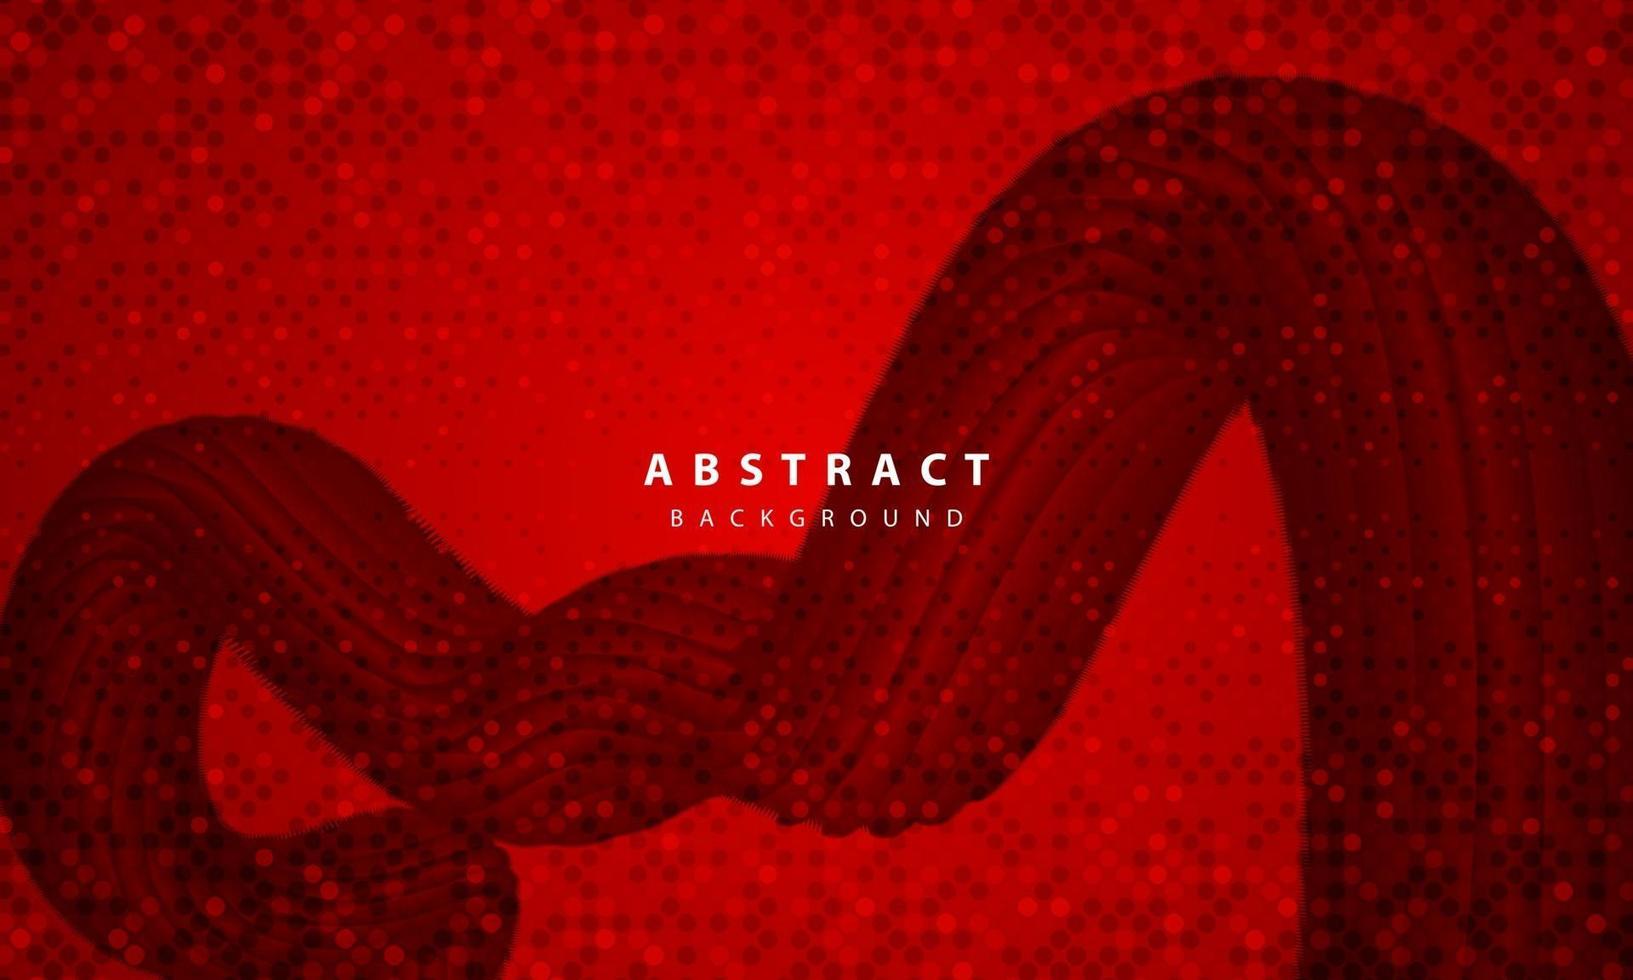 Dark abstract background with red overlap layers. Realistic texture with golden glitters dots element decoration. vector